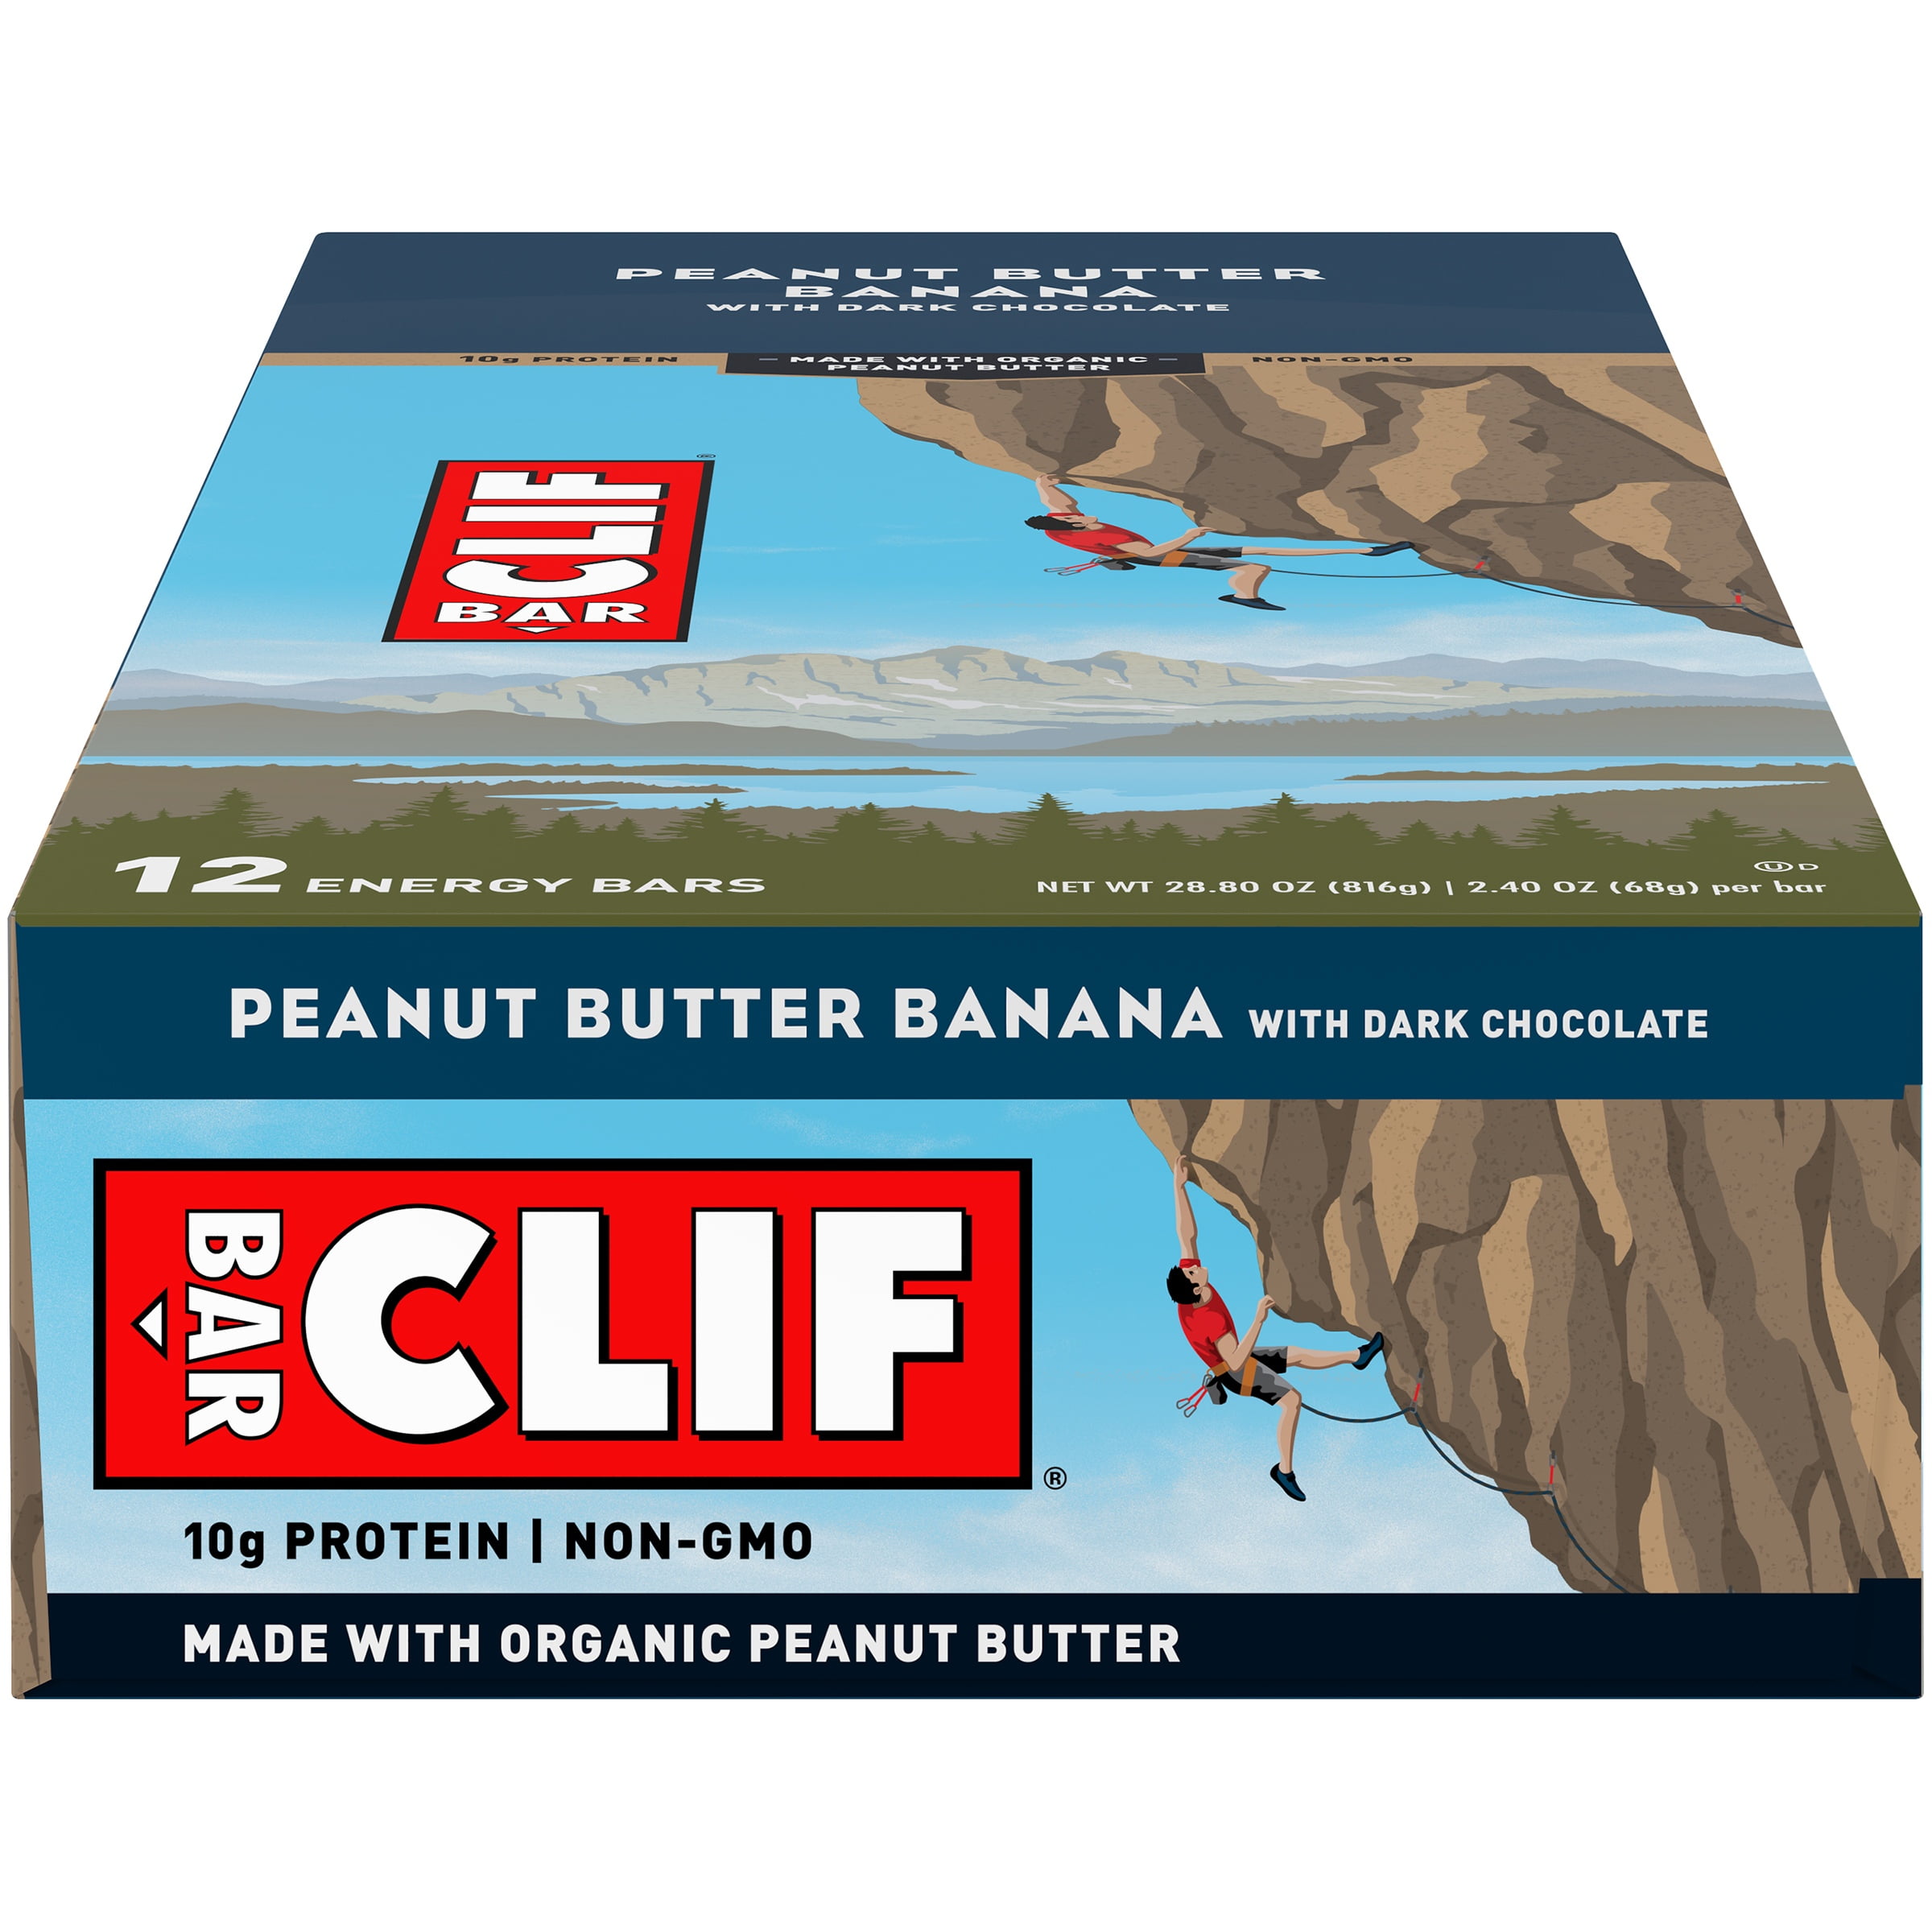 24 x 68g Bars Special Offer SAVE 11% 2 x boxes of 12 Clif Energy Bars 